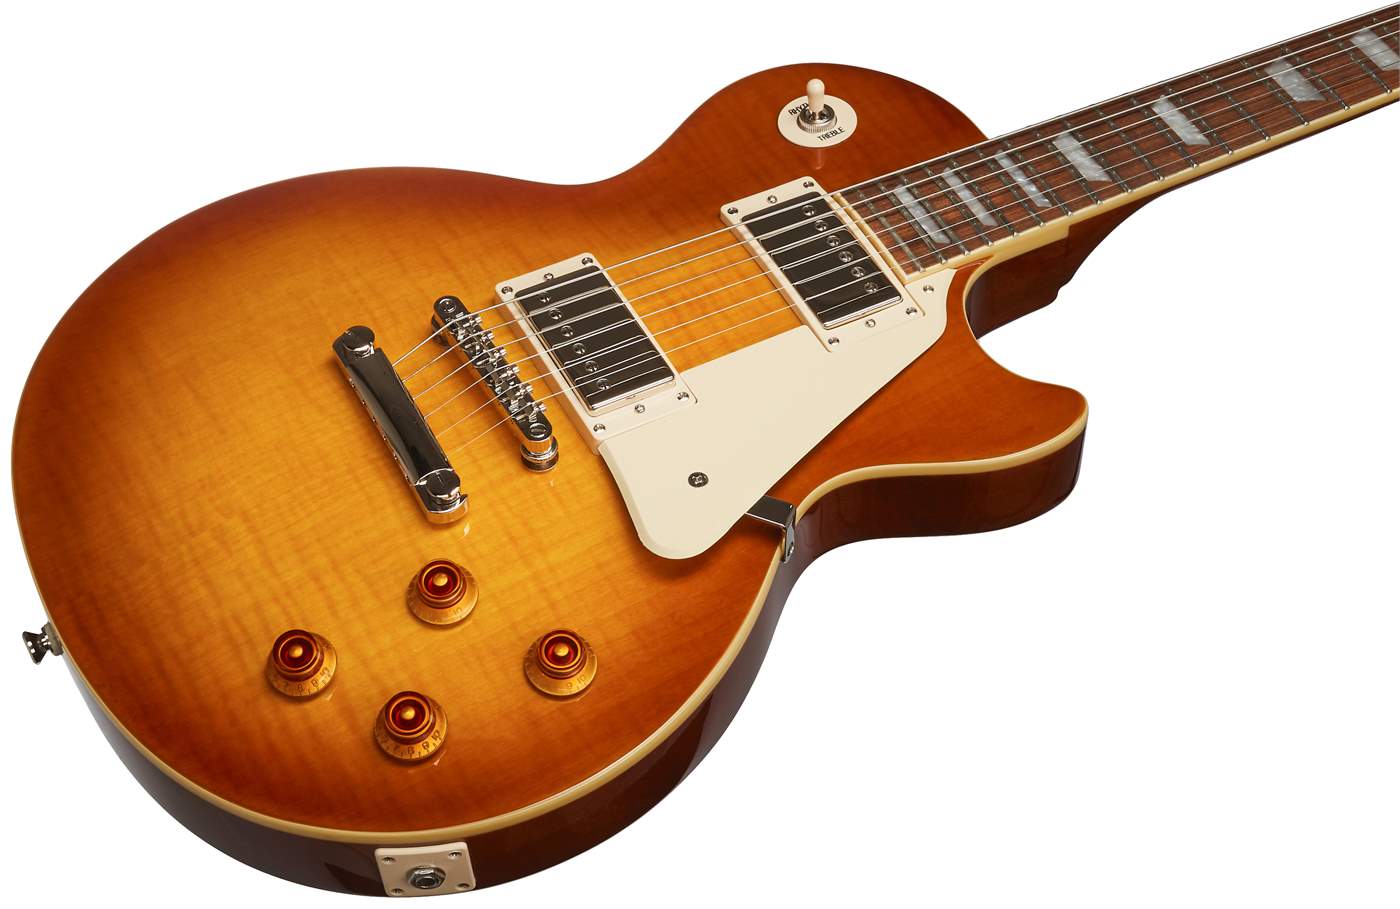 EPIPHONE Les Paul Standard Plus Top PRO HB Electric Guitar | Kytary.ie